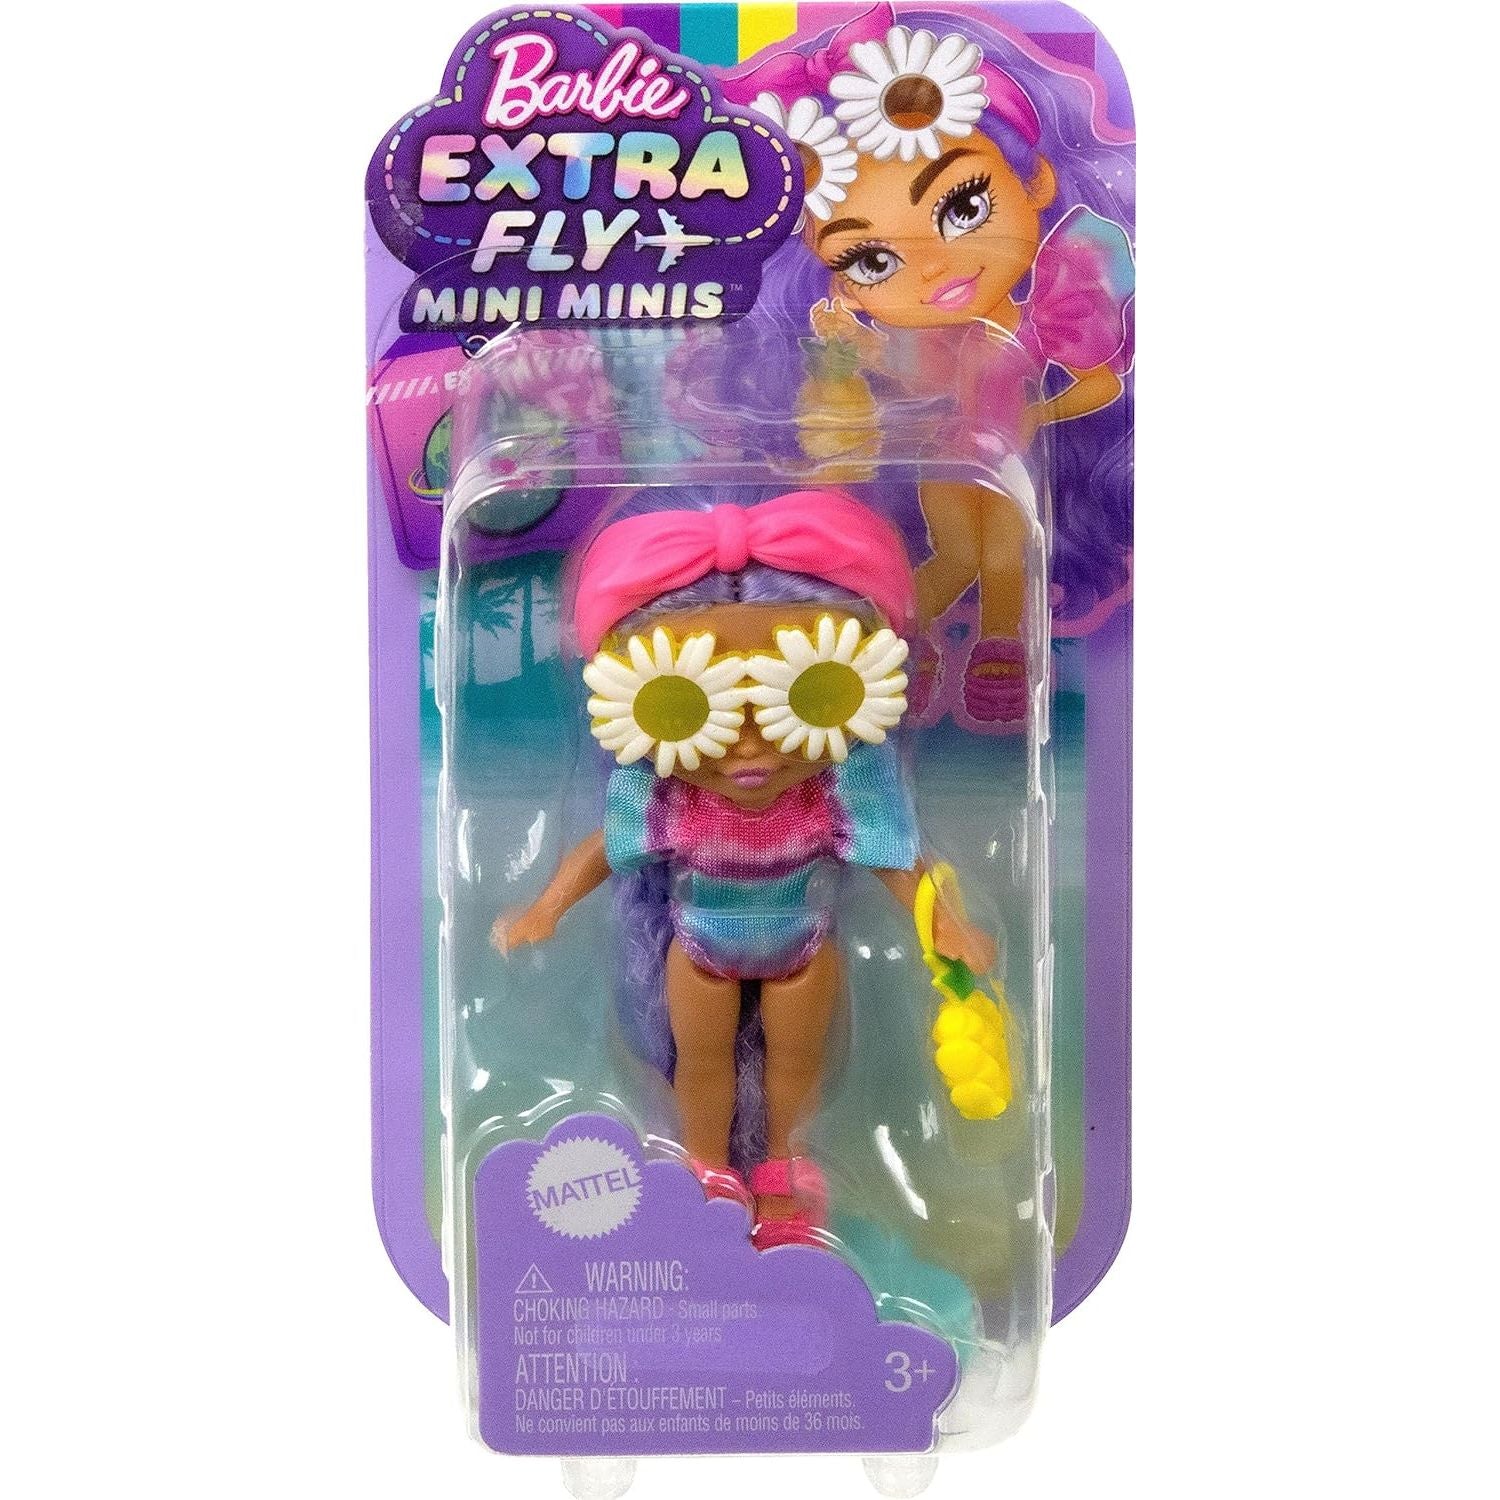 Barbie Extra Minis. Really cute mini doll - Miniature clothes for